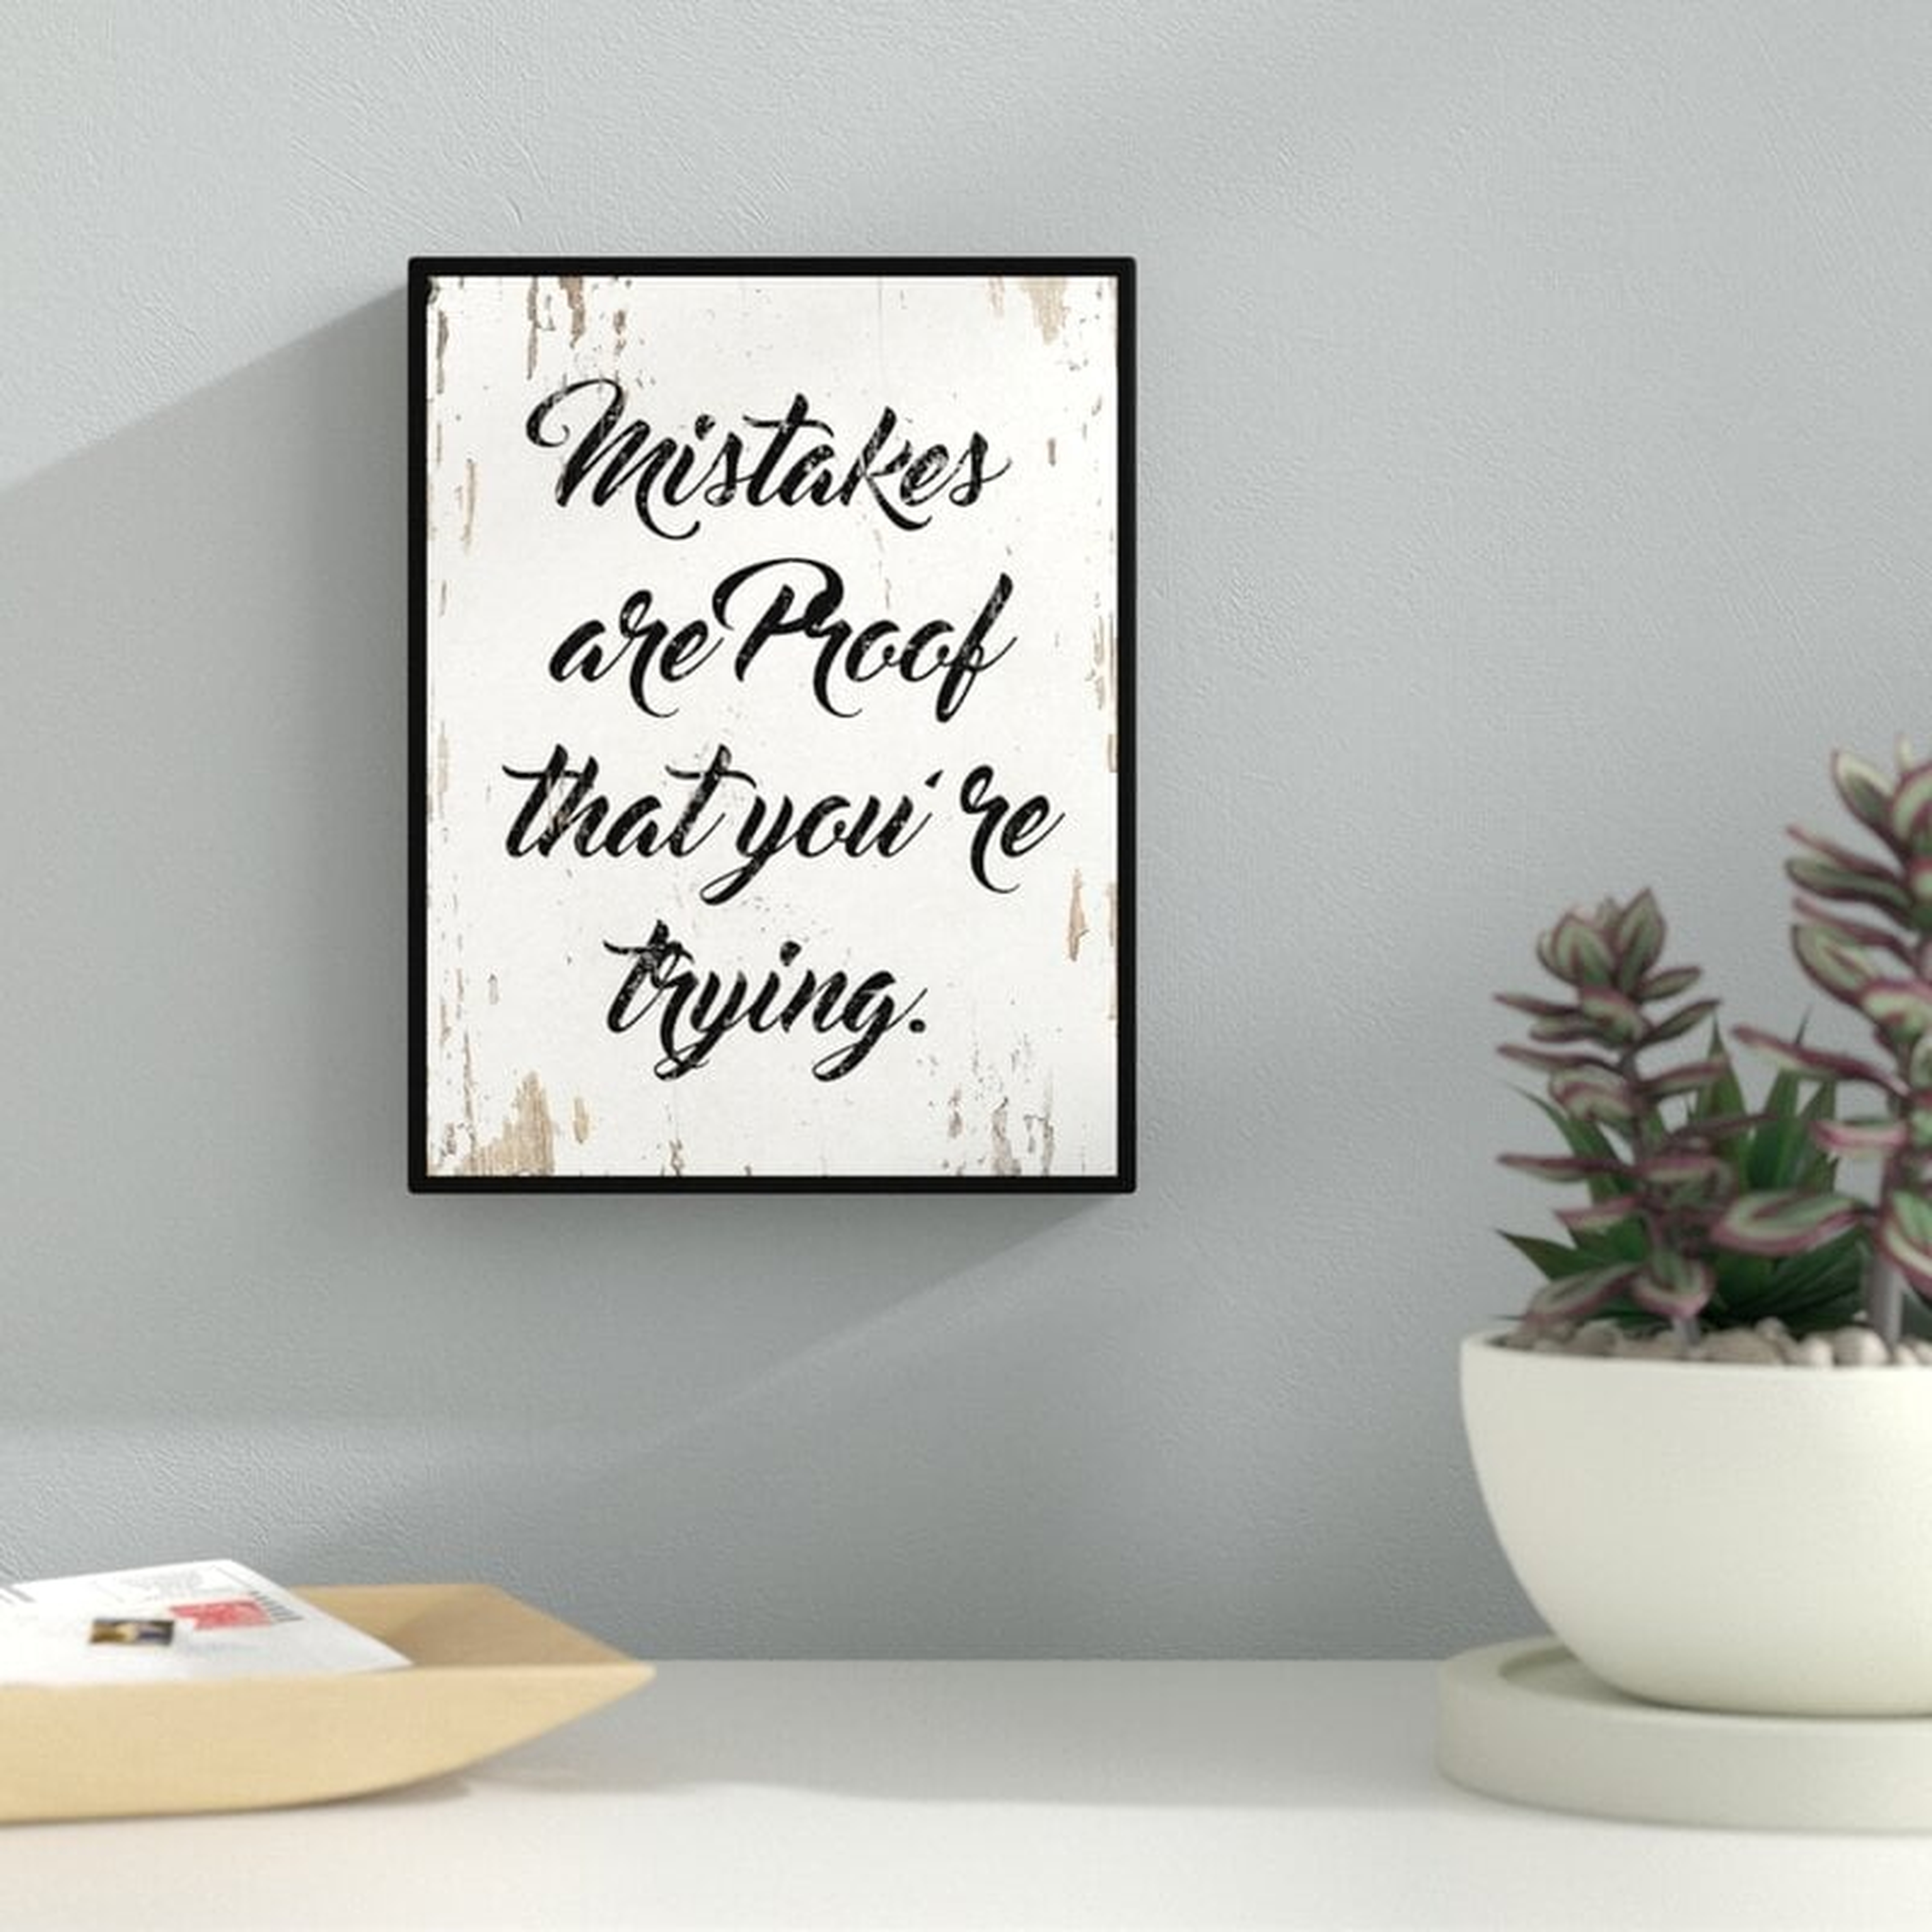 'Mistakes are Proof That You're Trying' Framed Textual Art on Canvas - Wayfair